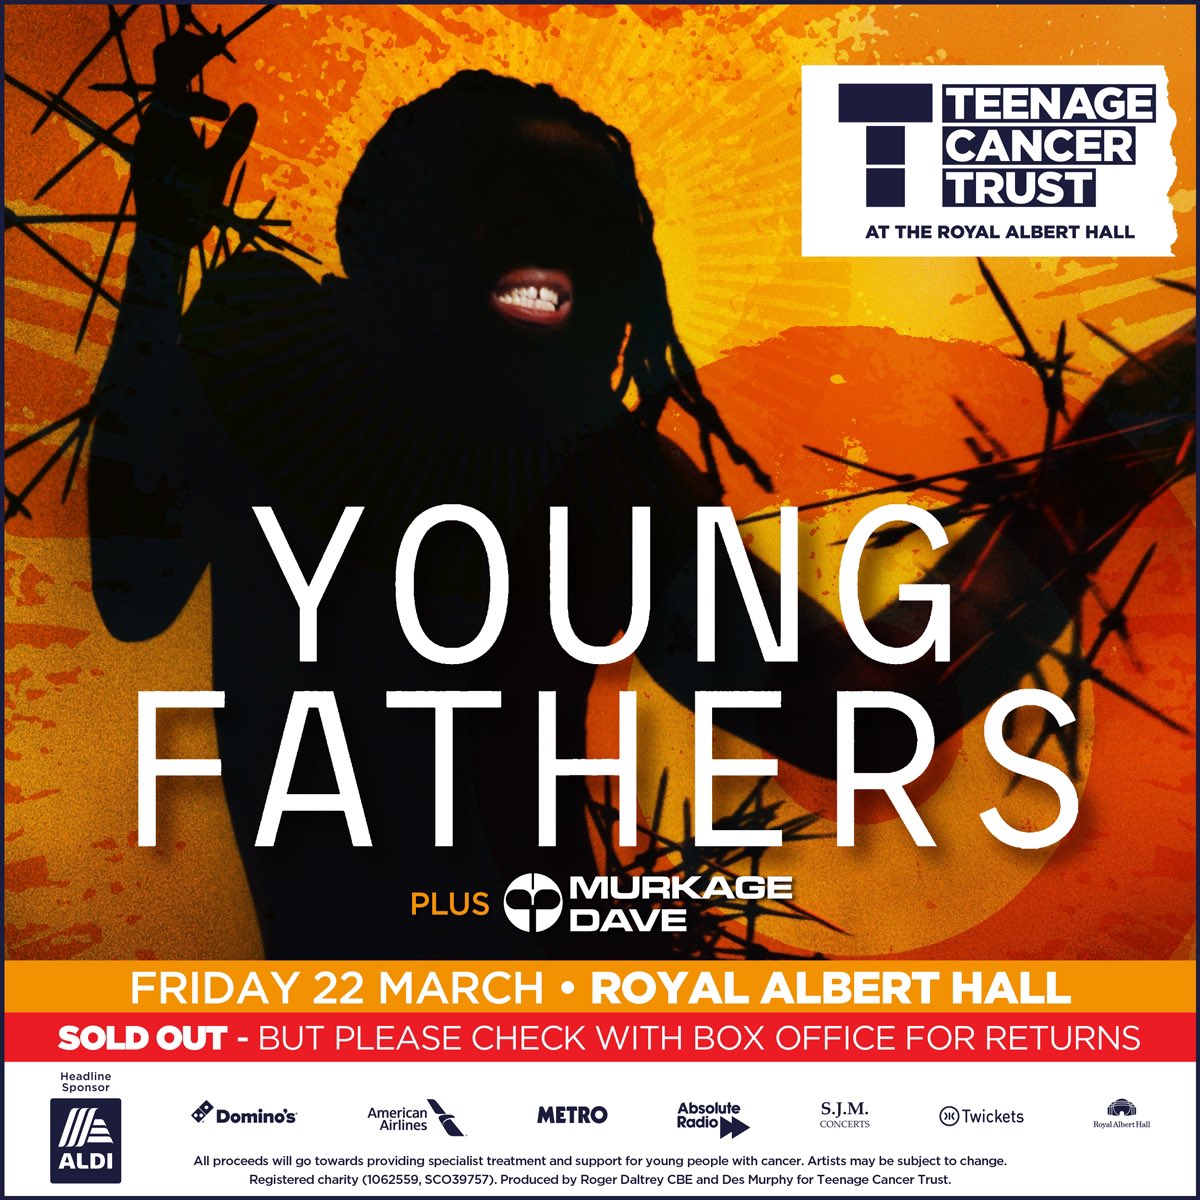 opening up for @Youngfathers at the Royal Albert Hall on Friday 22nd March in aid of @TeenageCancer 🙏🏾🖤